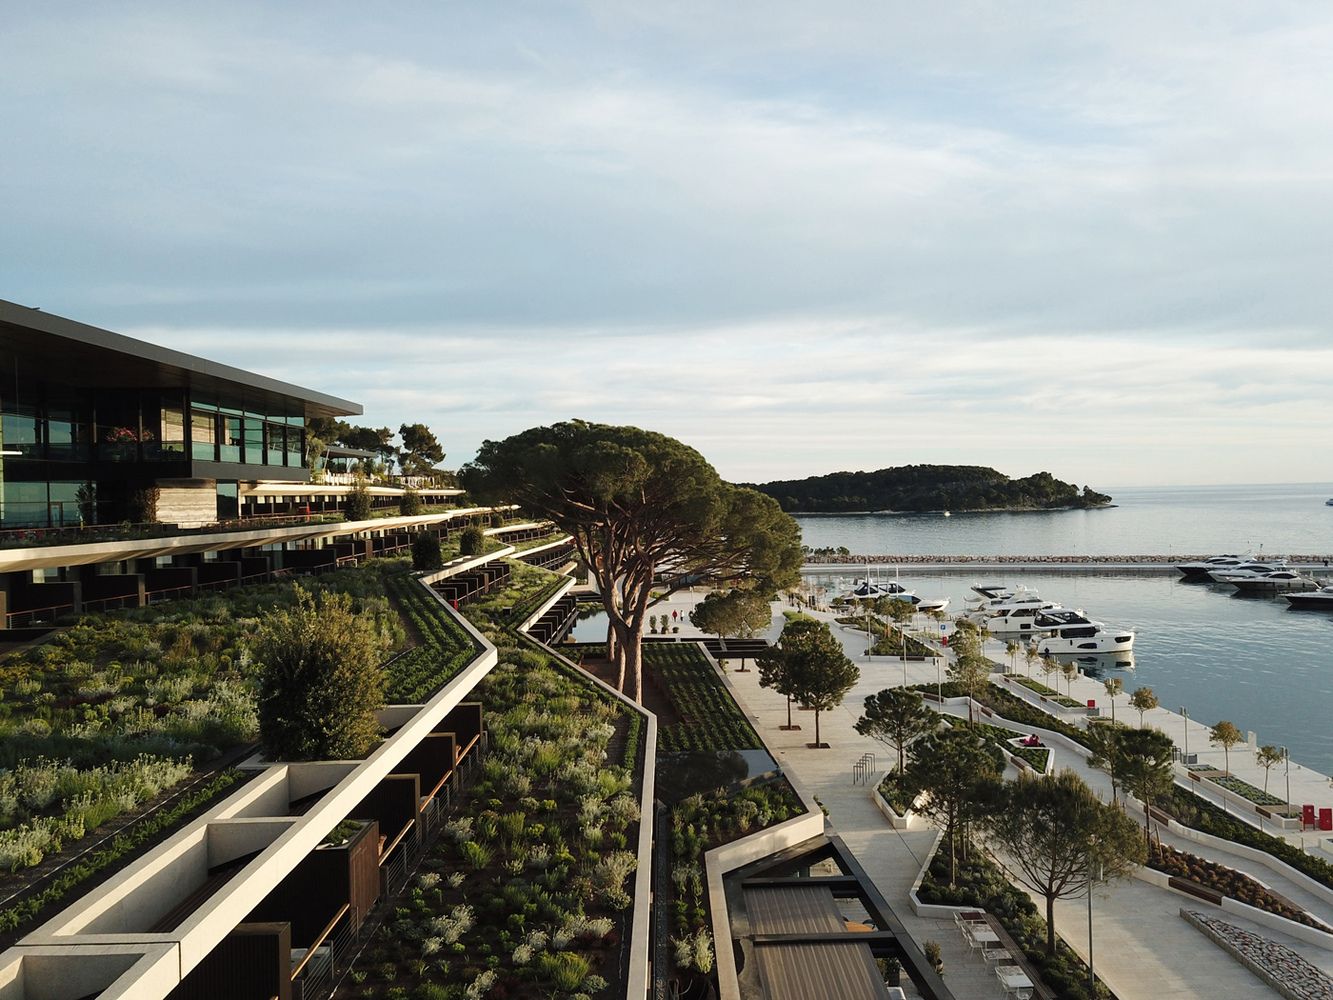 New wave hotels re-write the view of the Adriatic